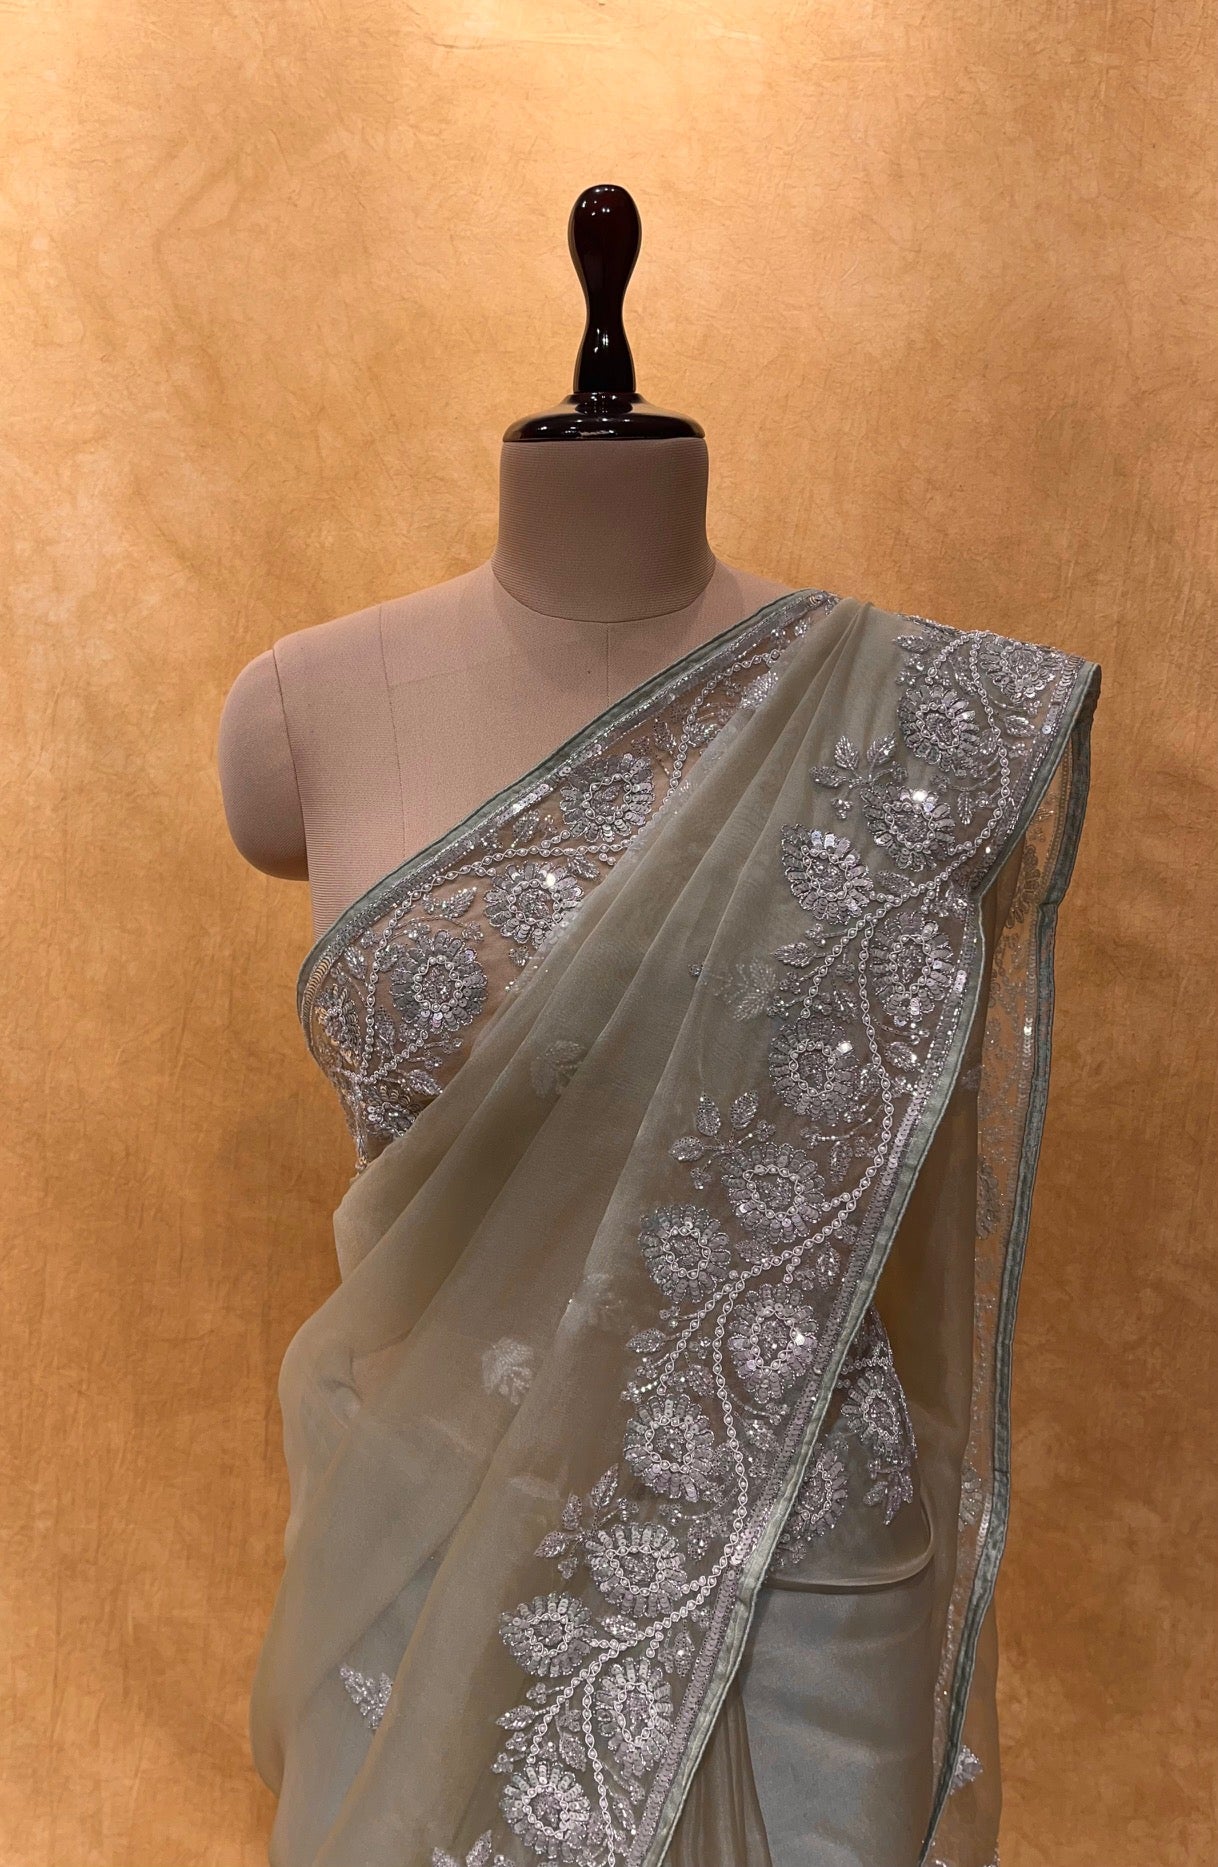 PISTA GREEN COLOUR ORGANZA SAREE EMBELLISHED WITHSEQUINS & PEARL WORK